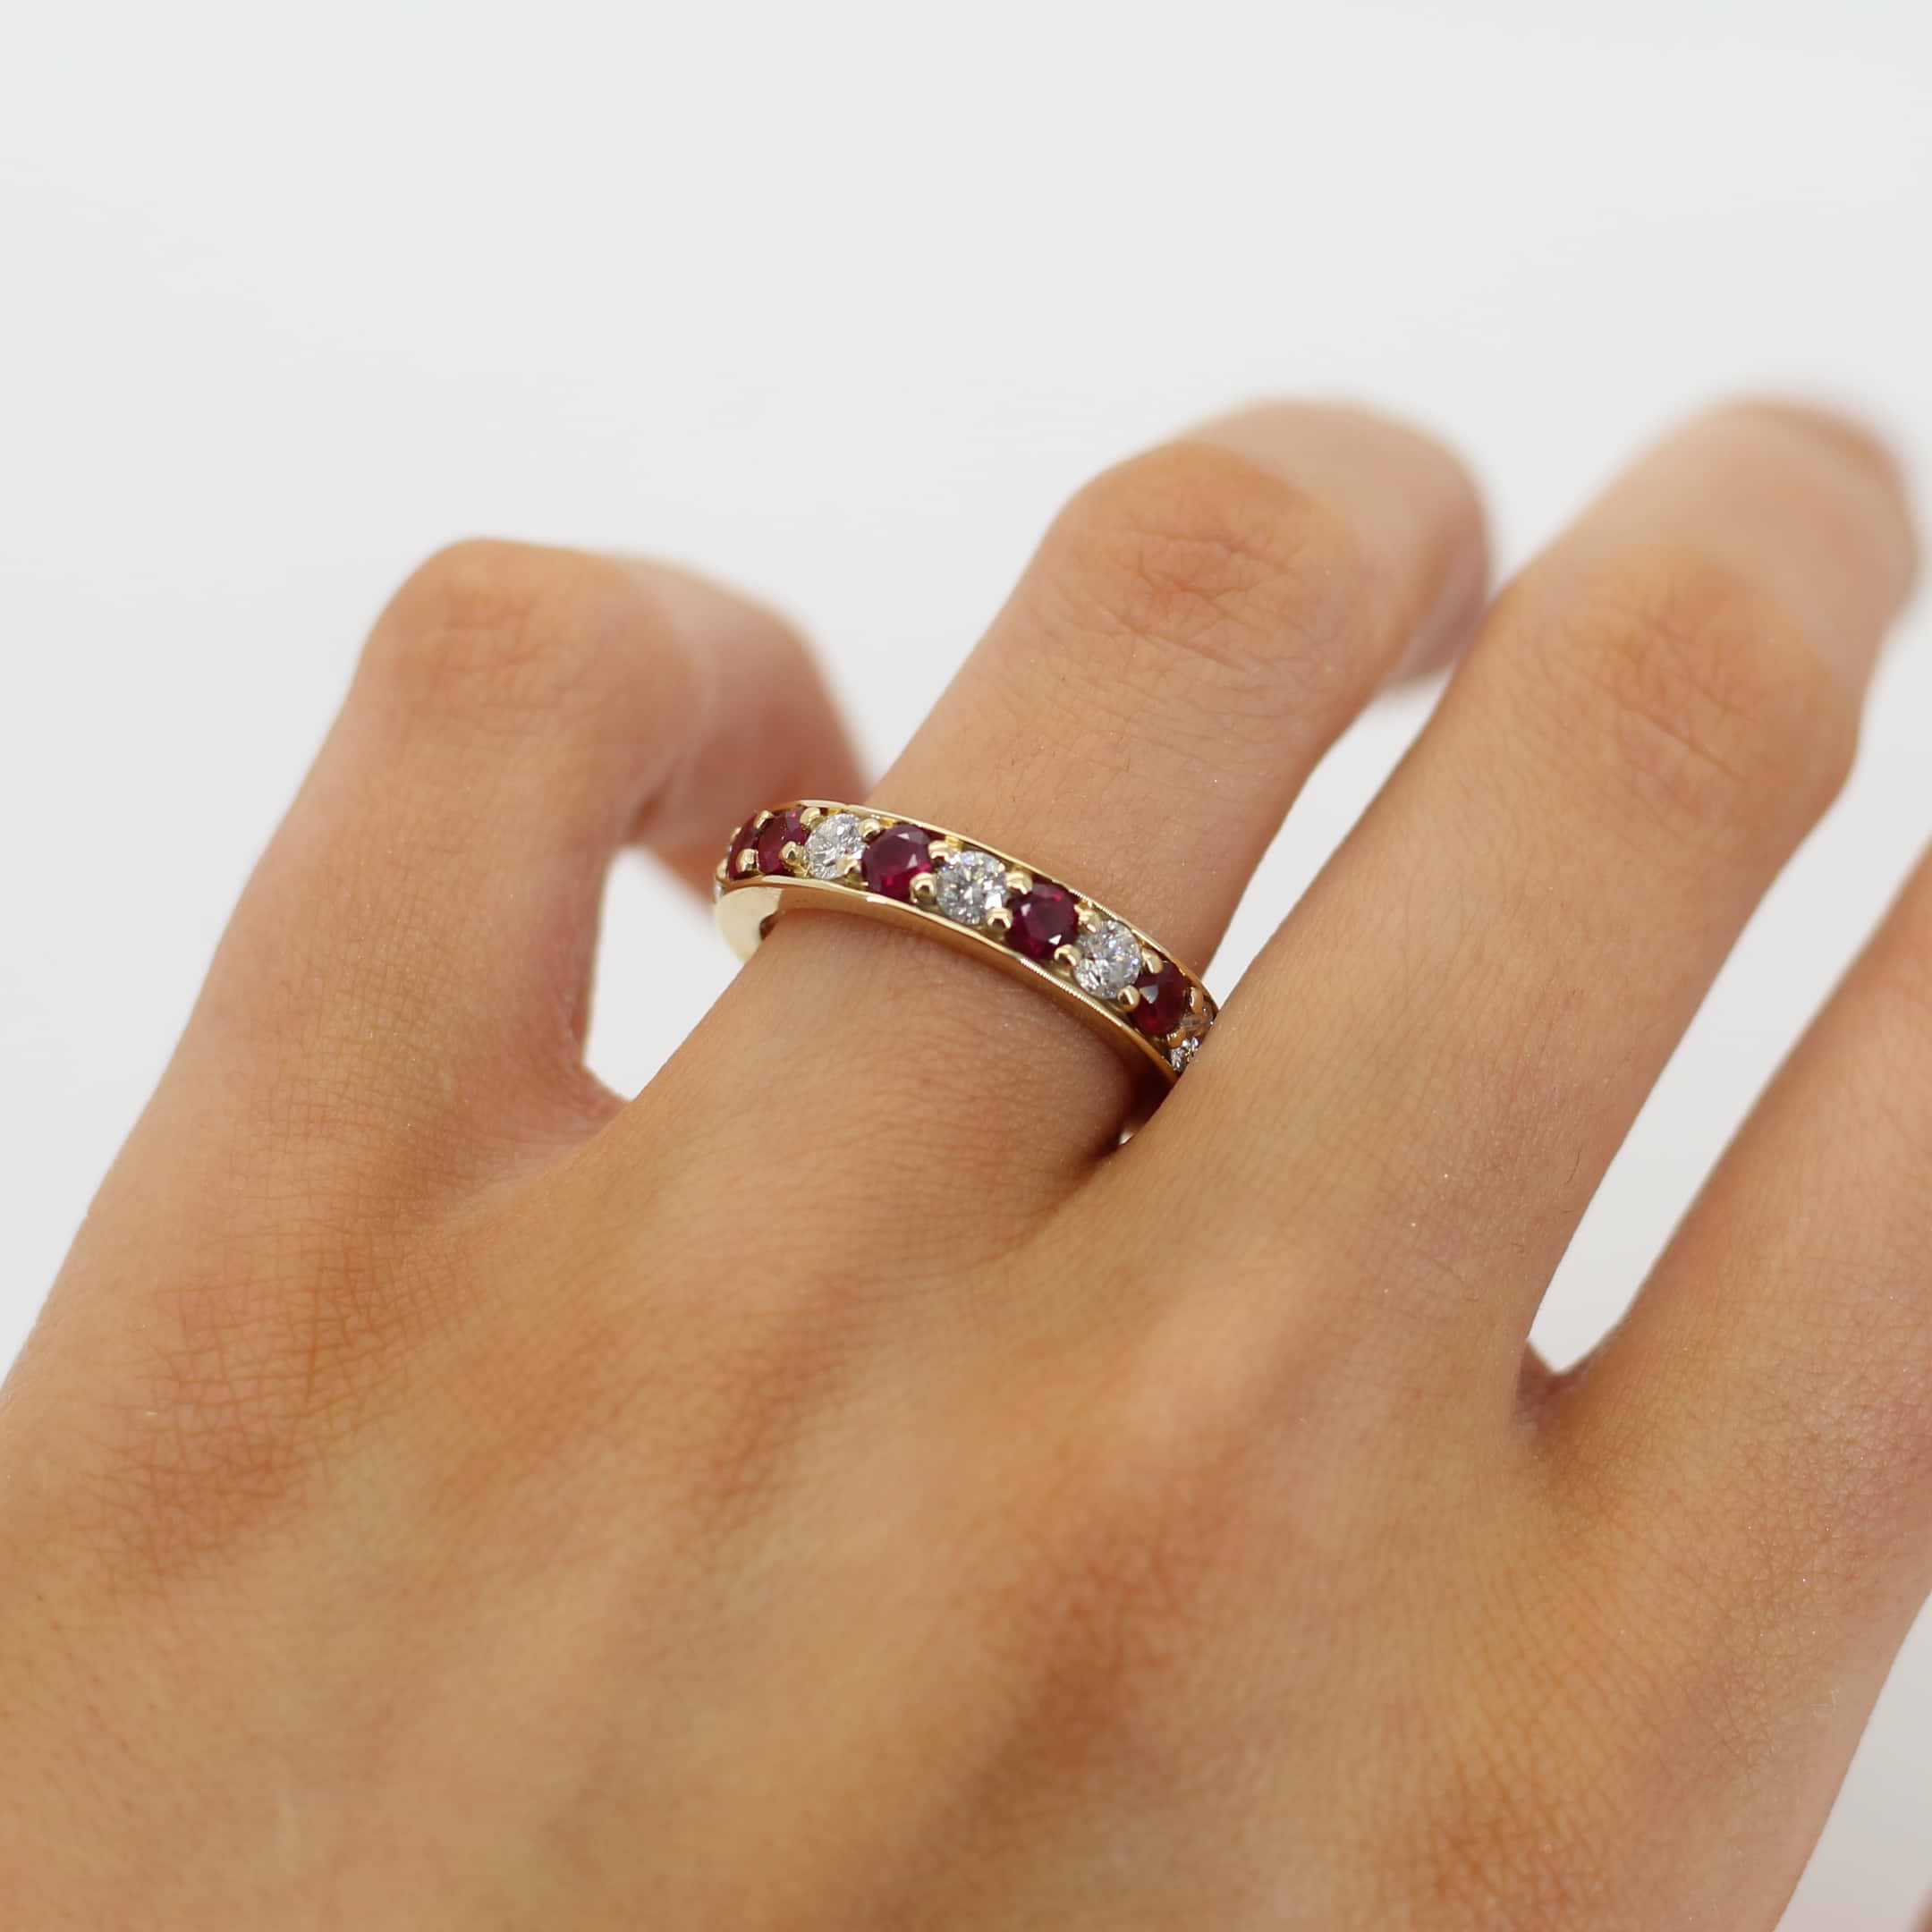 His Her Matching Wedding Ring Bands in 18k Gold Ruby Diamond Ring